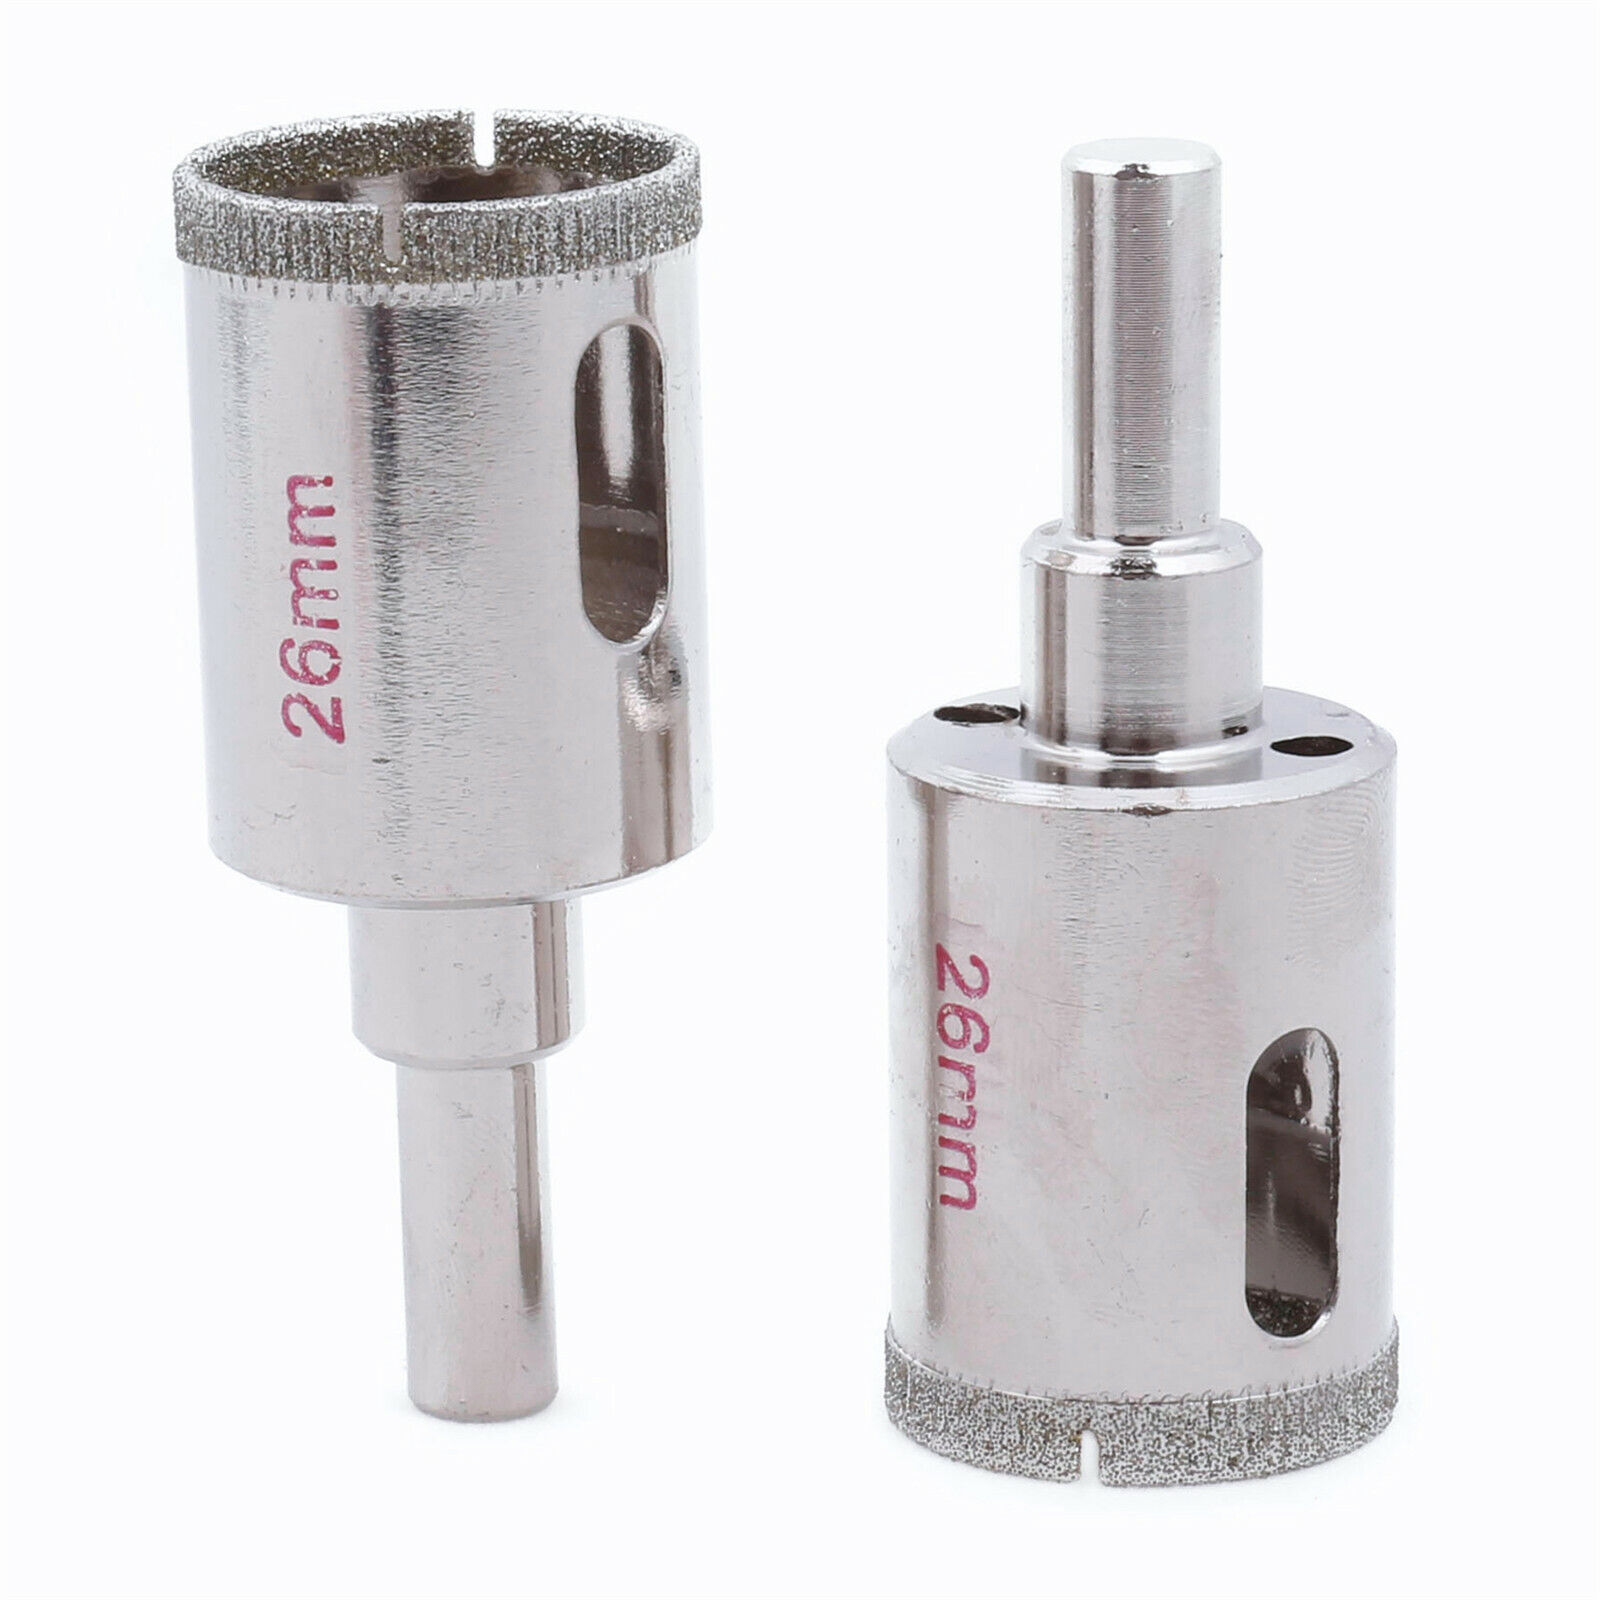 2Pcs Diamond Core Drill Bit 26mm Cutter Hole saw for Granite Stone Marble Tiles ILOVETOOL Does Not Apply